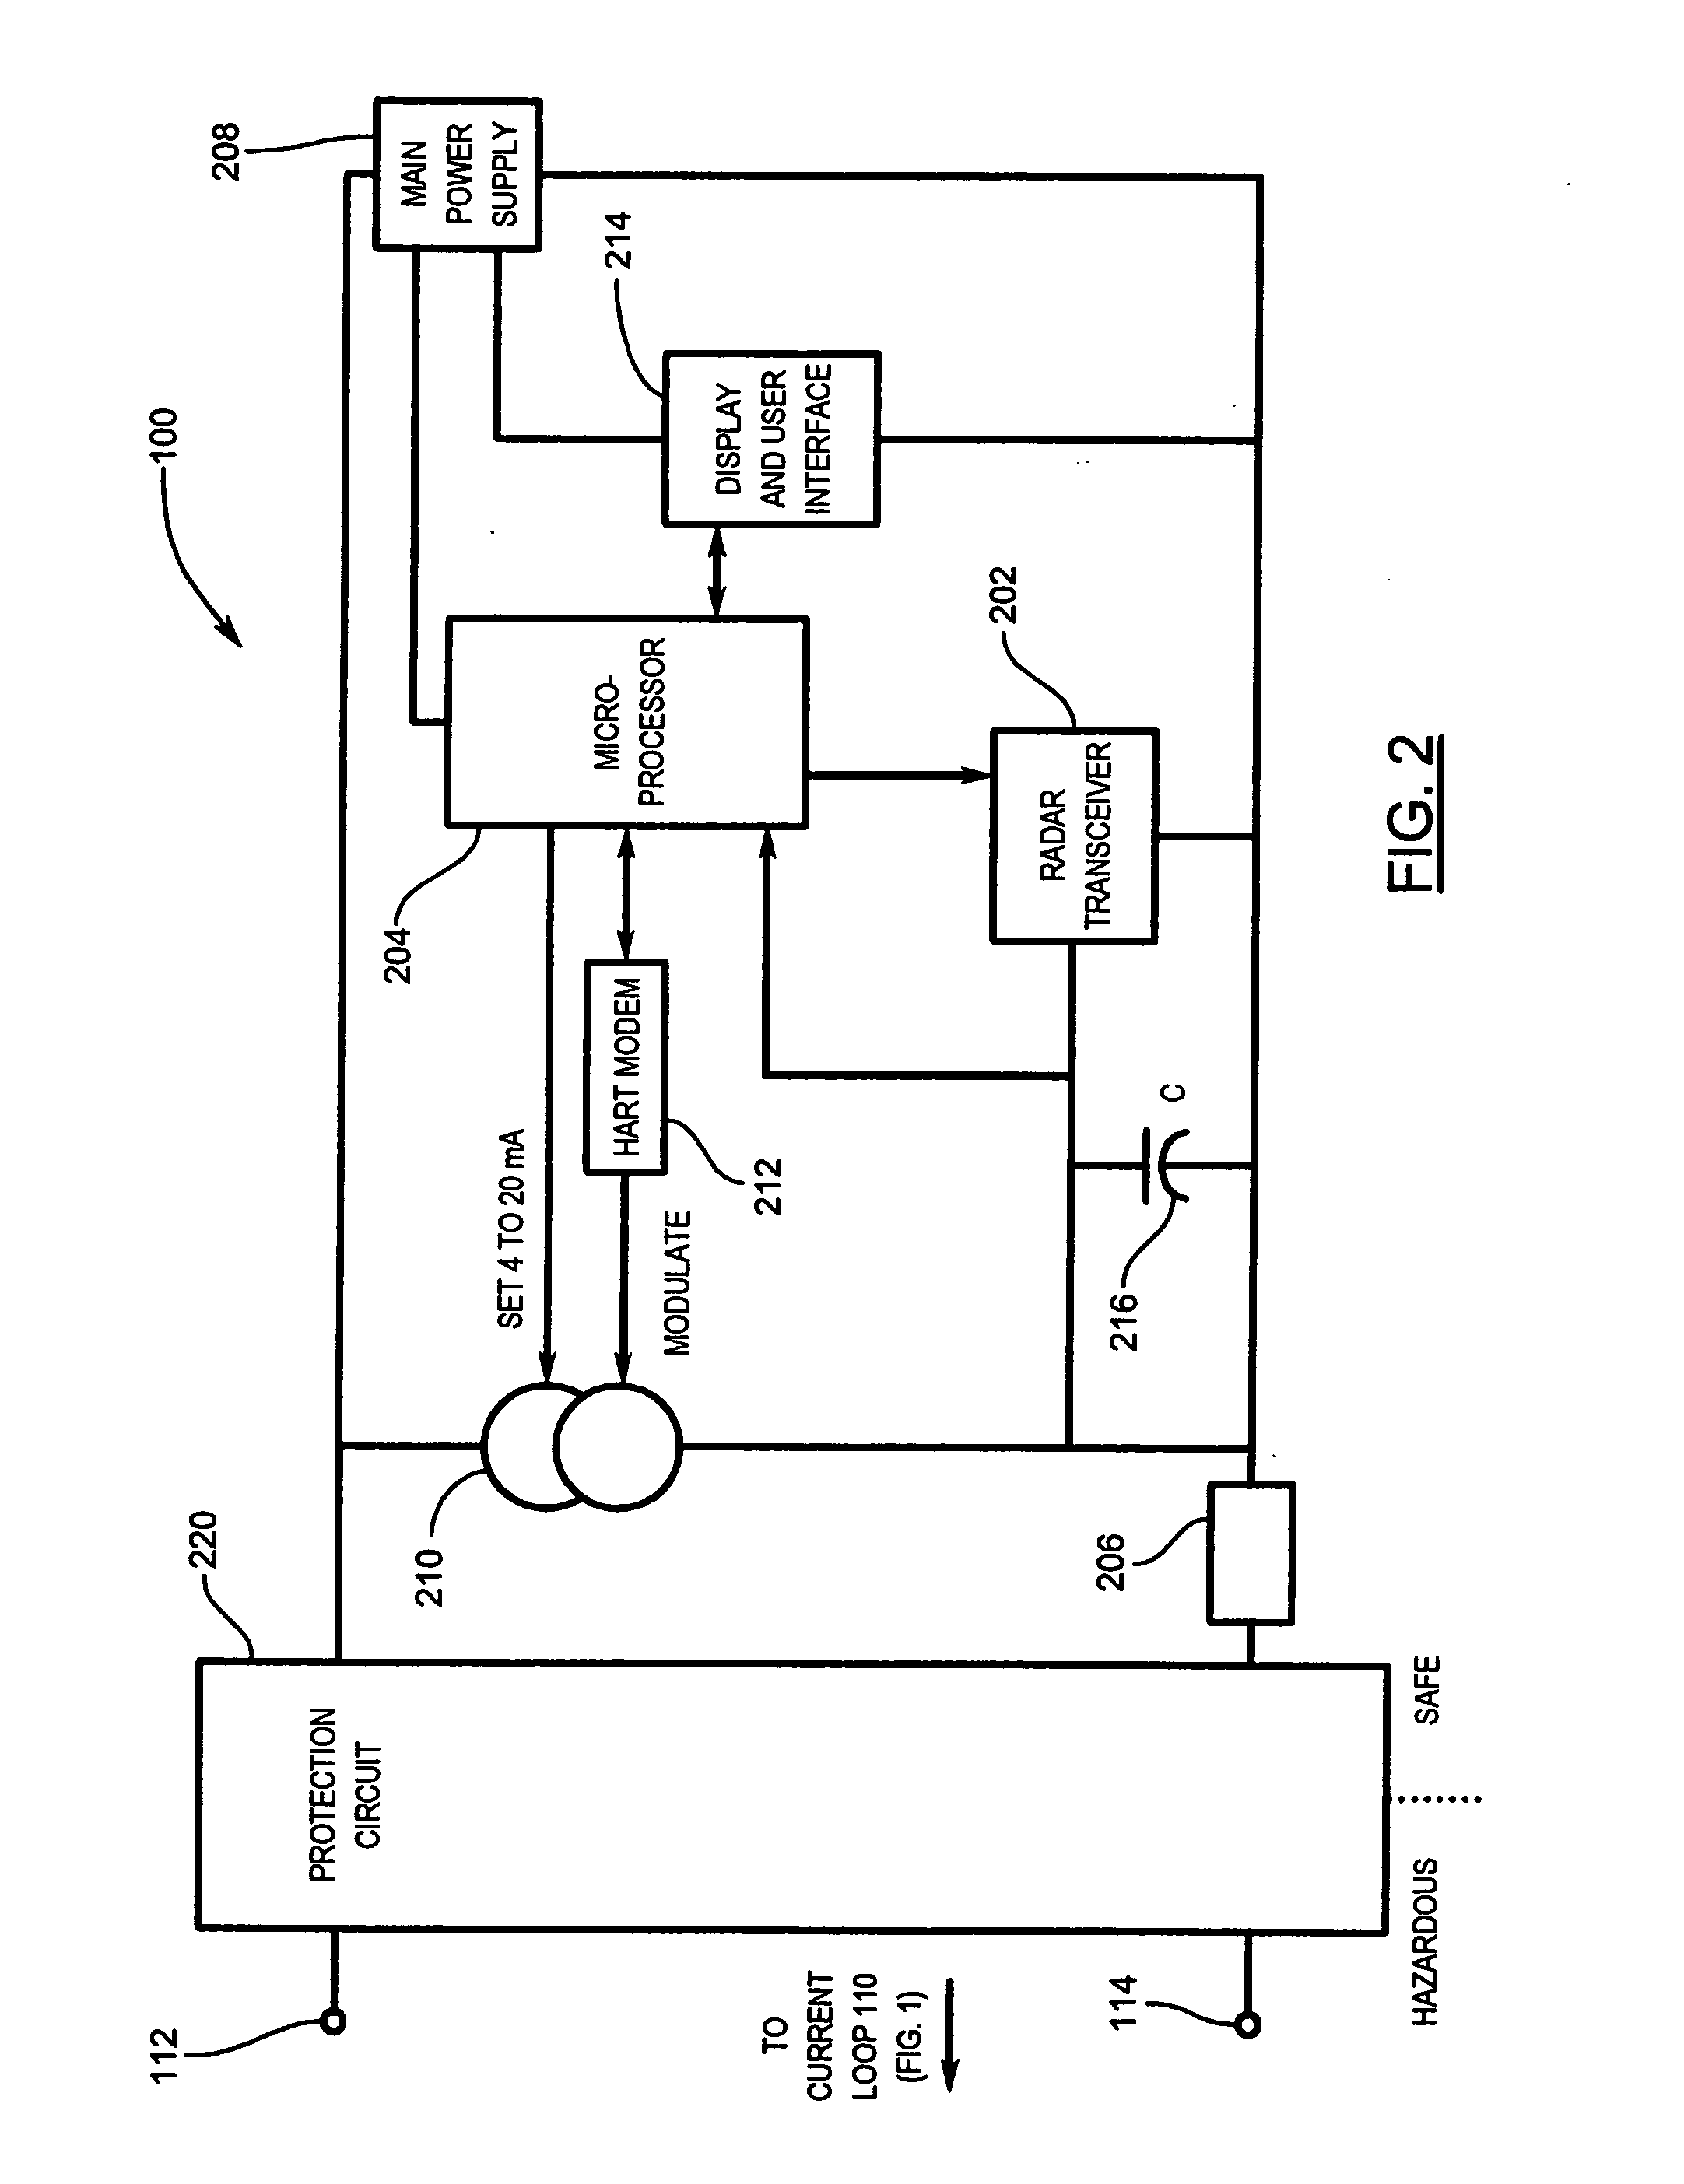 Lithography tool having a vacuum reticle library coupled to a vacuum chamber